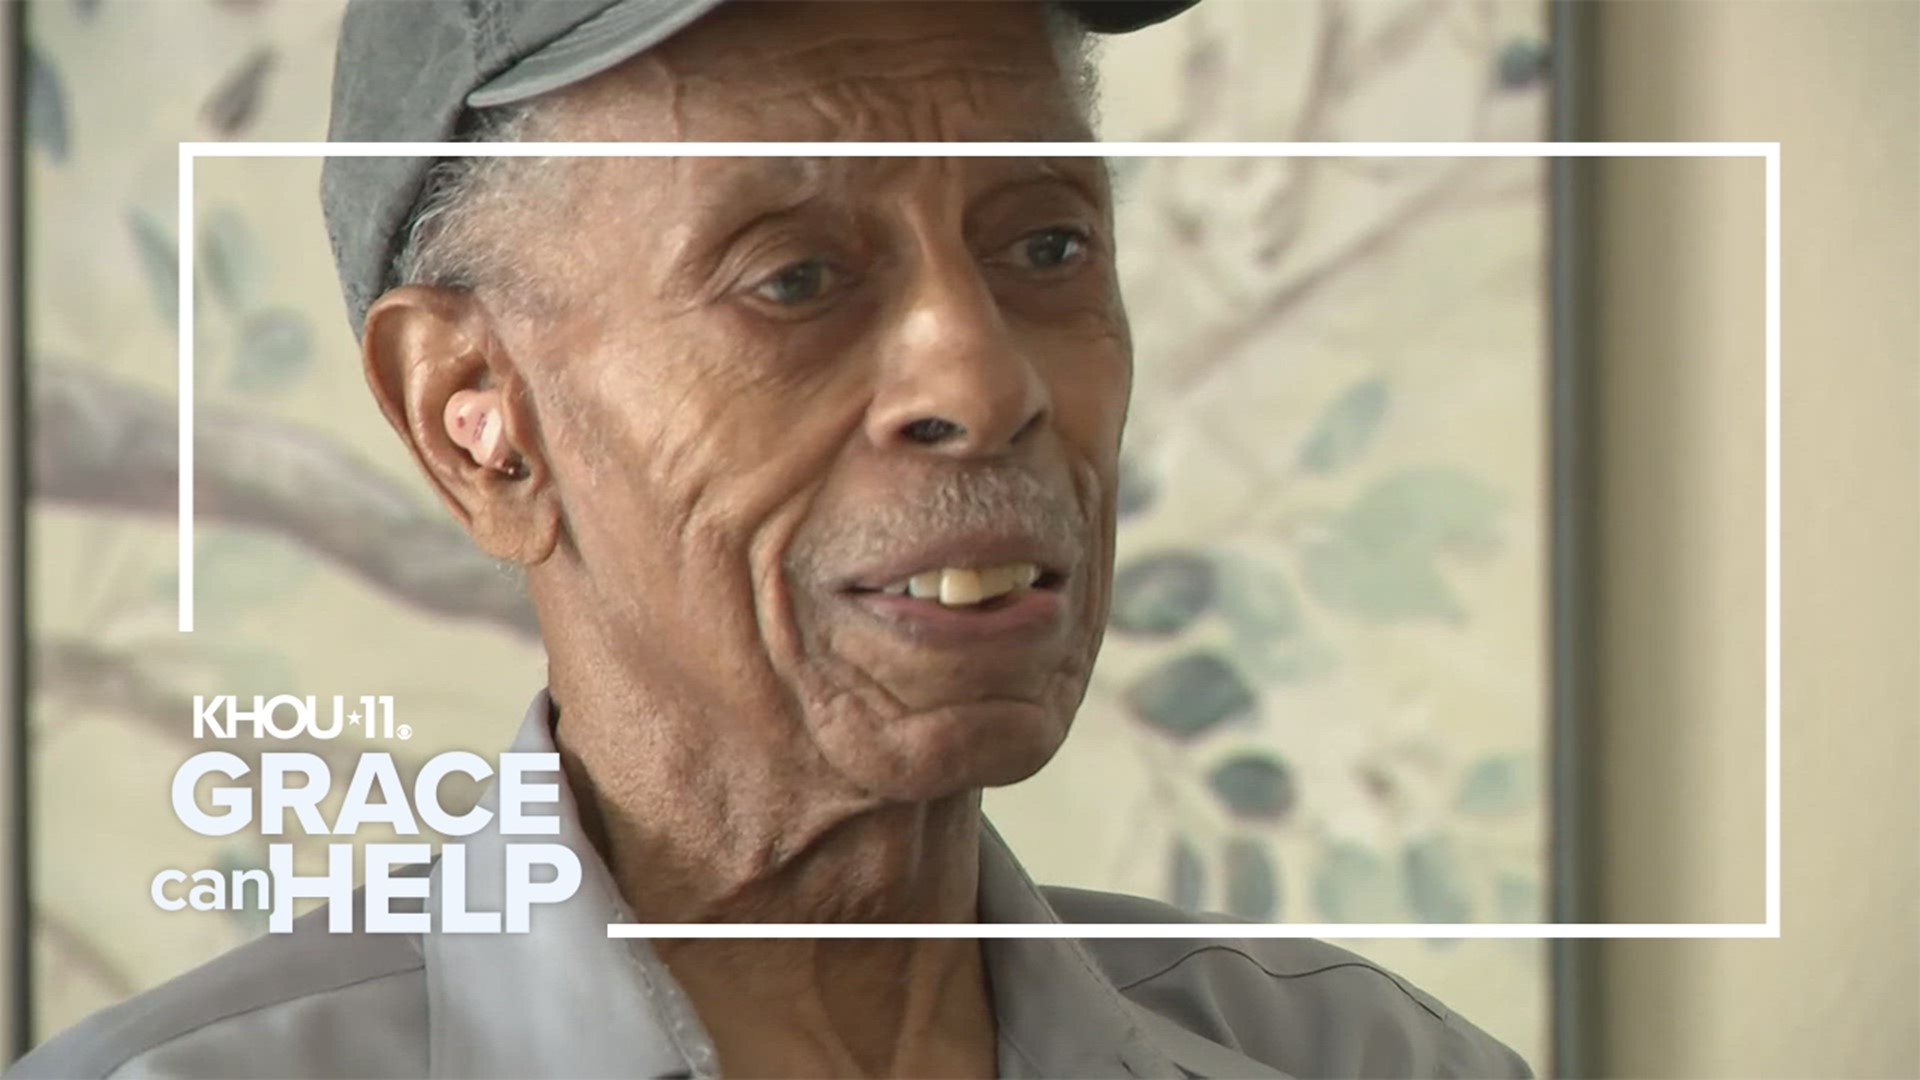 Since our original story aired last year, several non-profits have stepped up to help Walter Dashiell, 95.